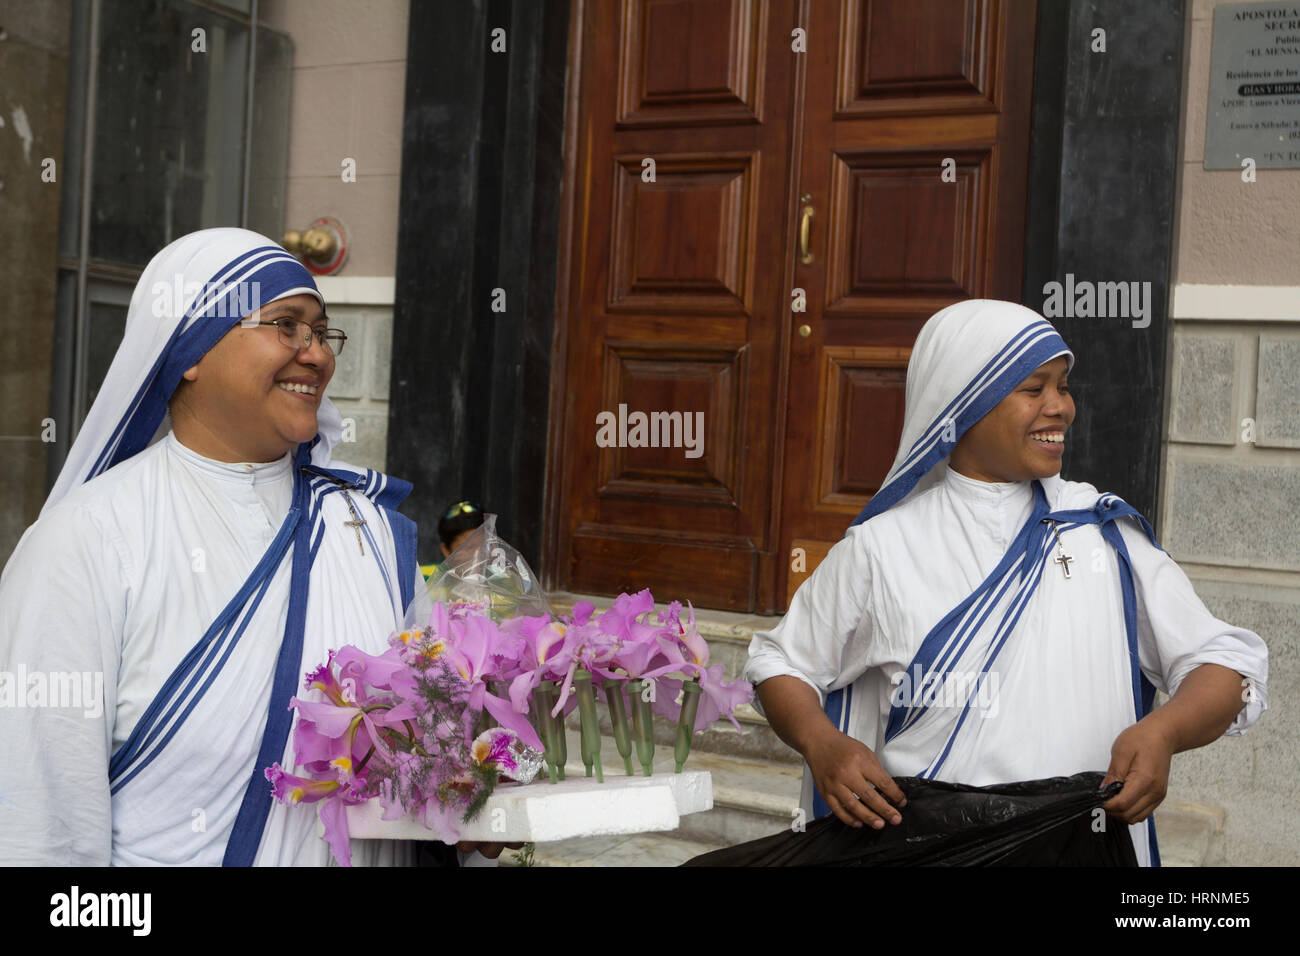 Venezuela Caracas 28/03/2013.Nuns Sisters of charity with orchids during Easter celebration. Stock Photo